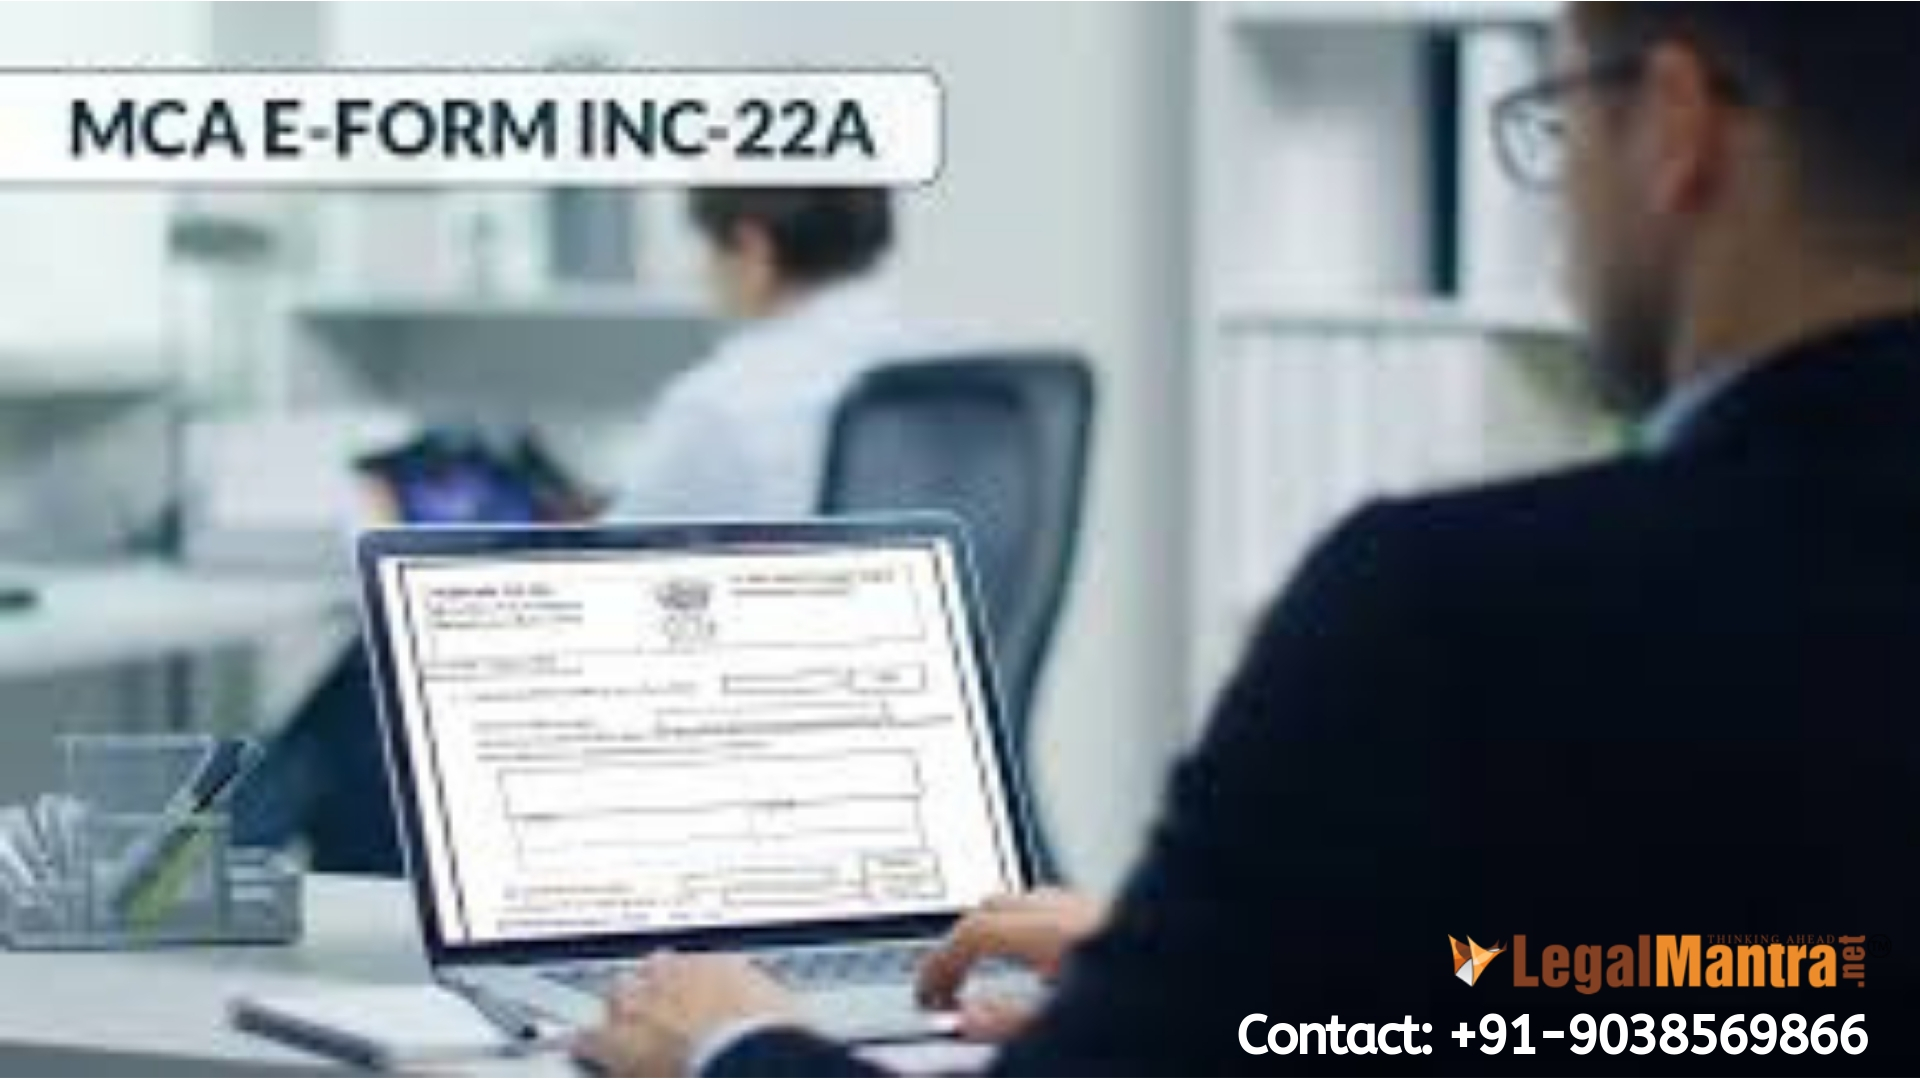 Easy Guide to MCA E-Form INC-22A with Filing Process & Due Dates